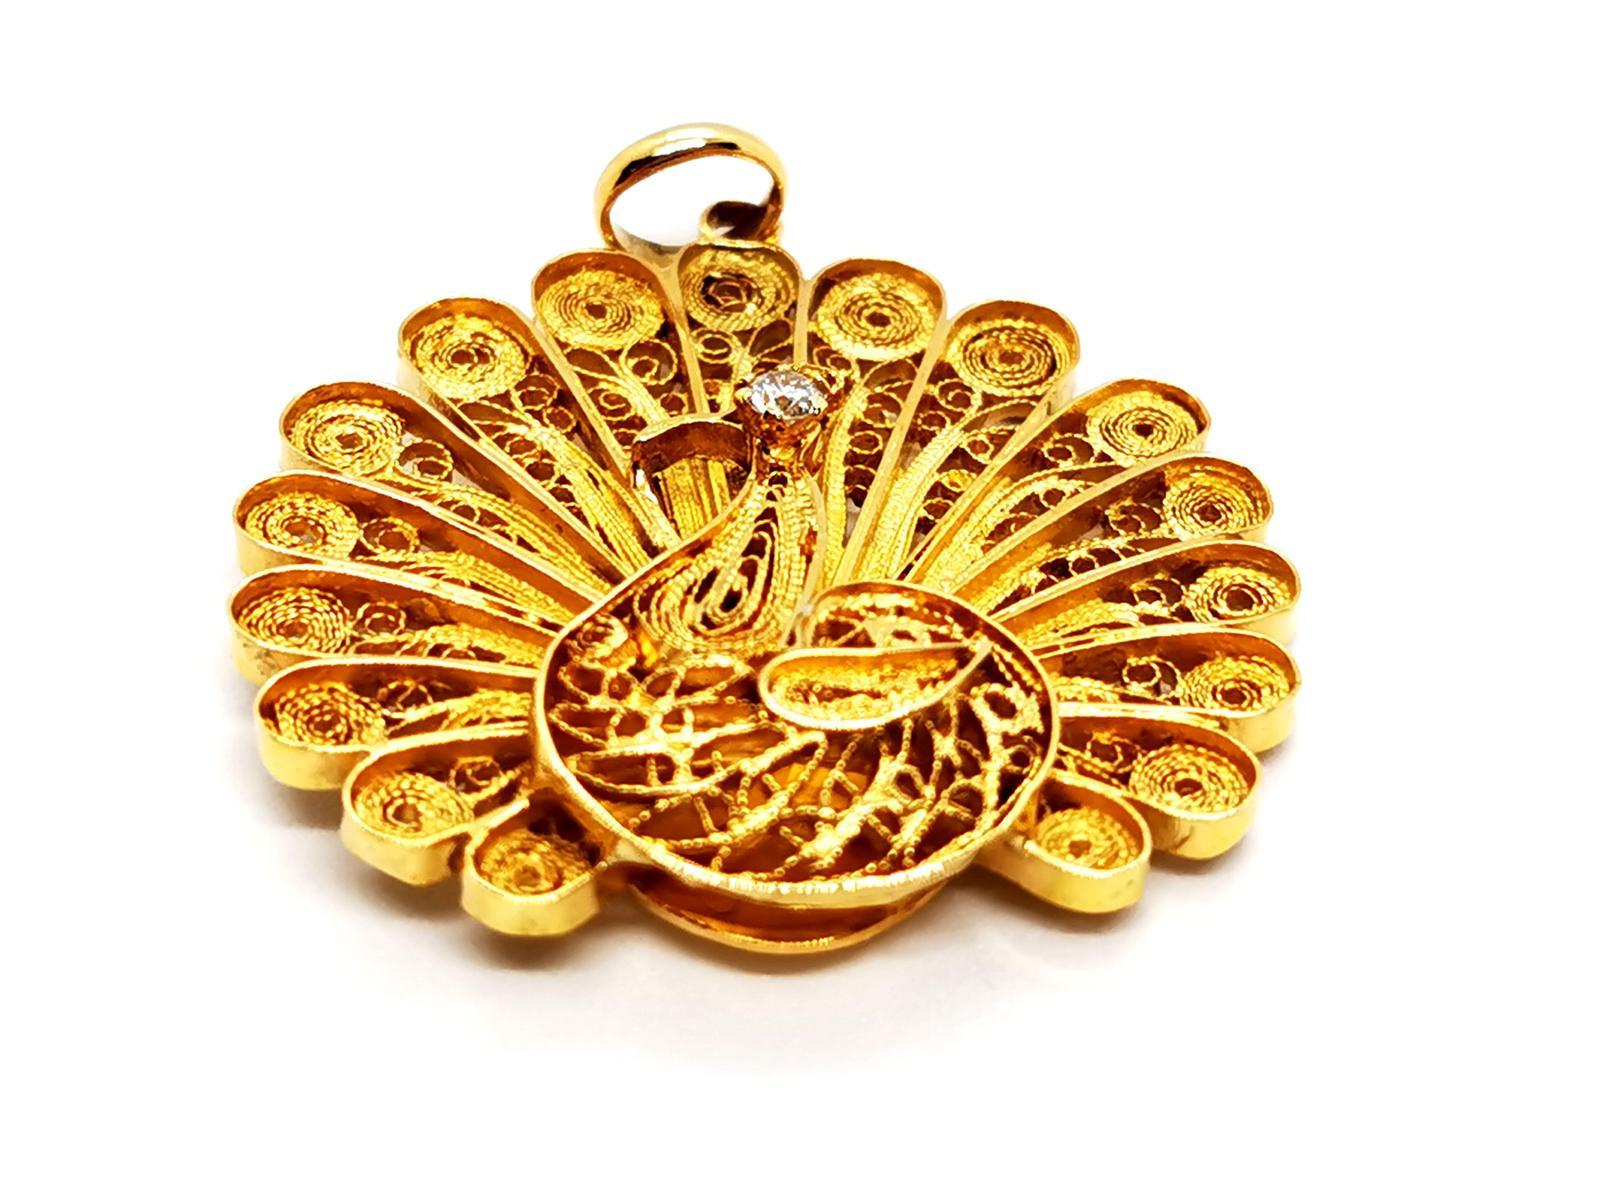 Peacock pendant in yellow gold 750 thousandths (18 carats). vintage model. peacock motif filigree set with a diamond. brilliant cut of about 0.09 ct. size (bail included): 4.4 cm x 3 . 63 cm. total weight: 14.70 g. eagle punch head on the bail